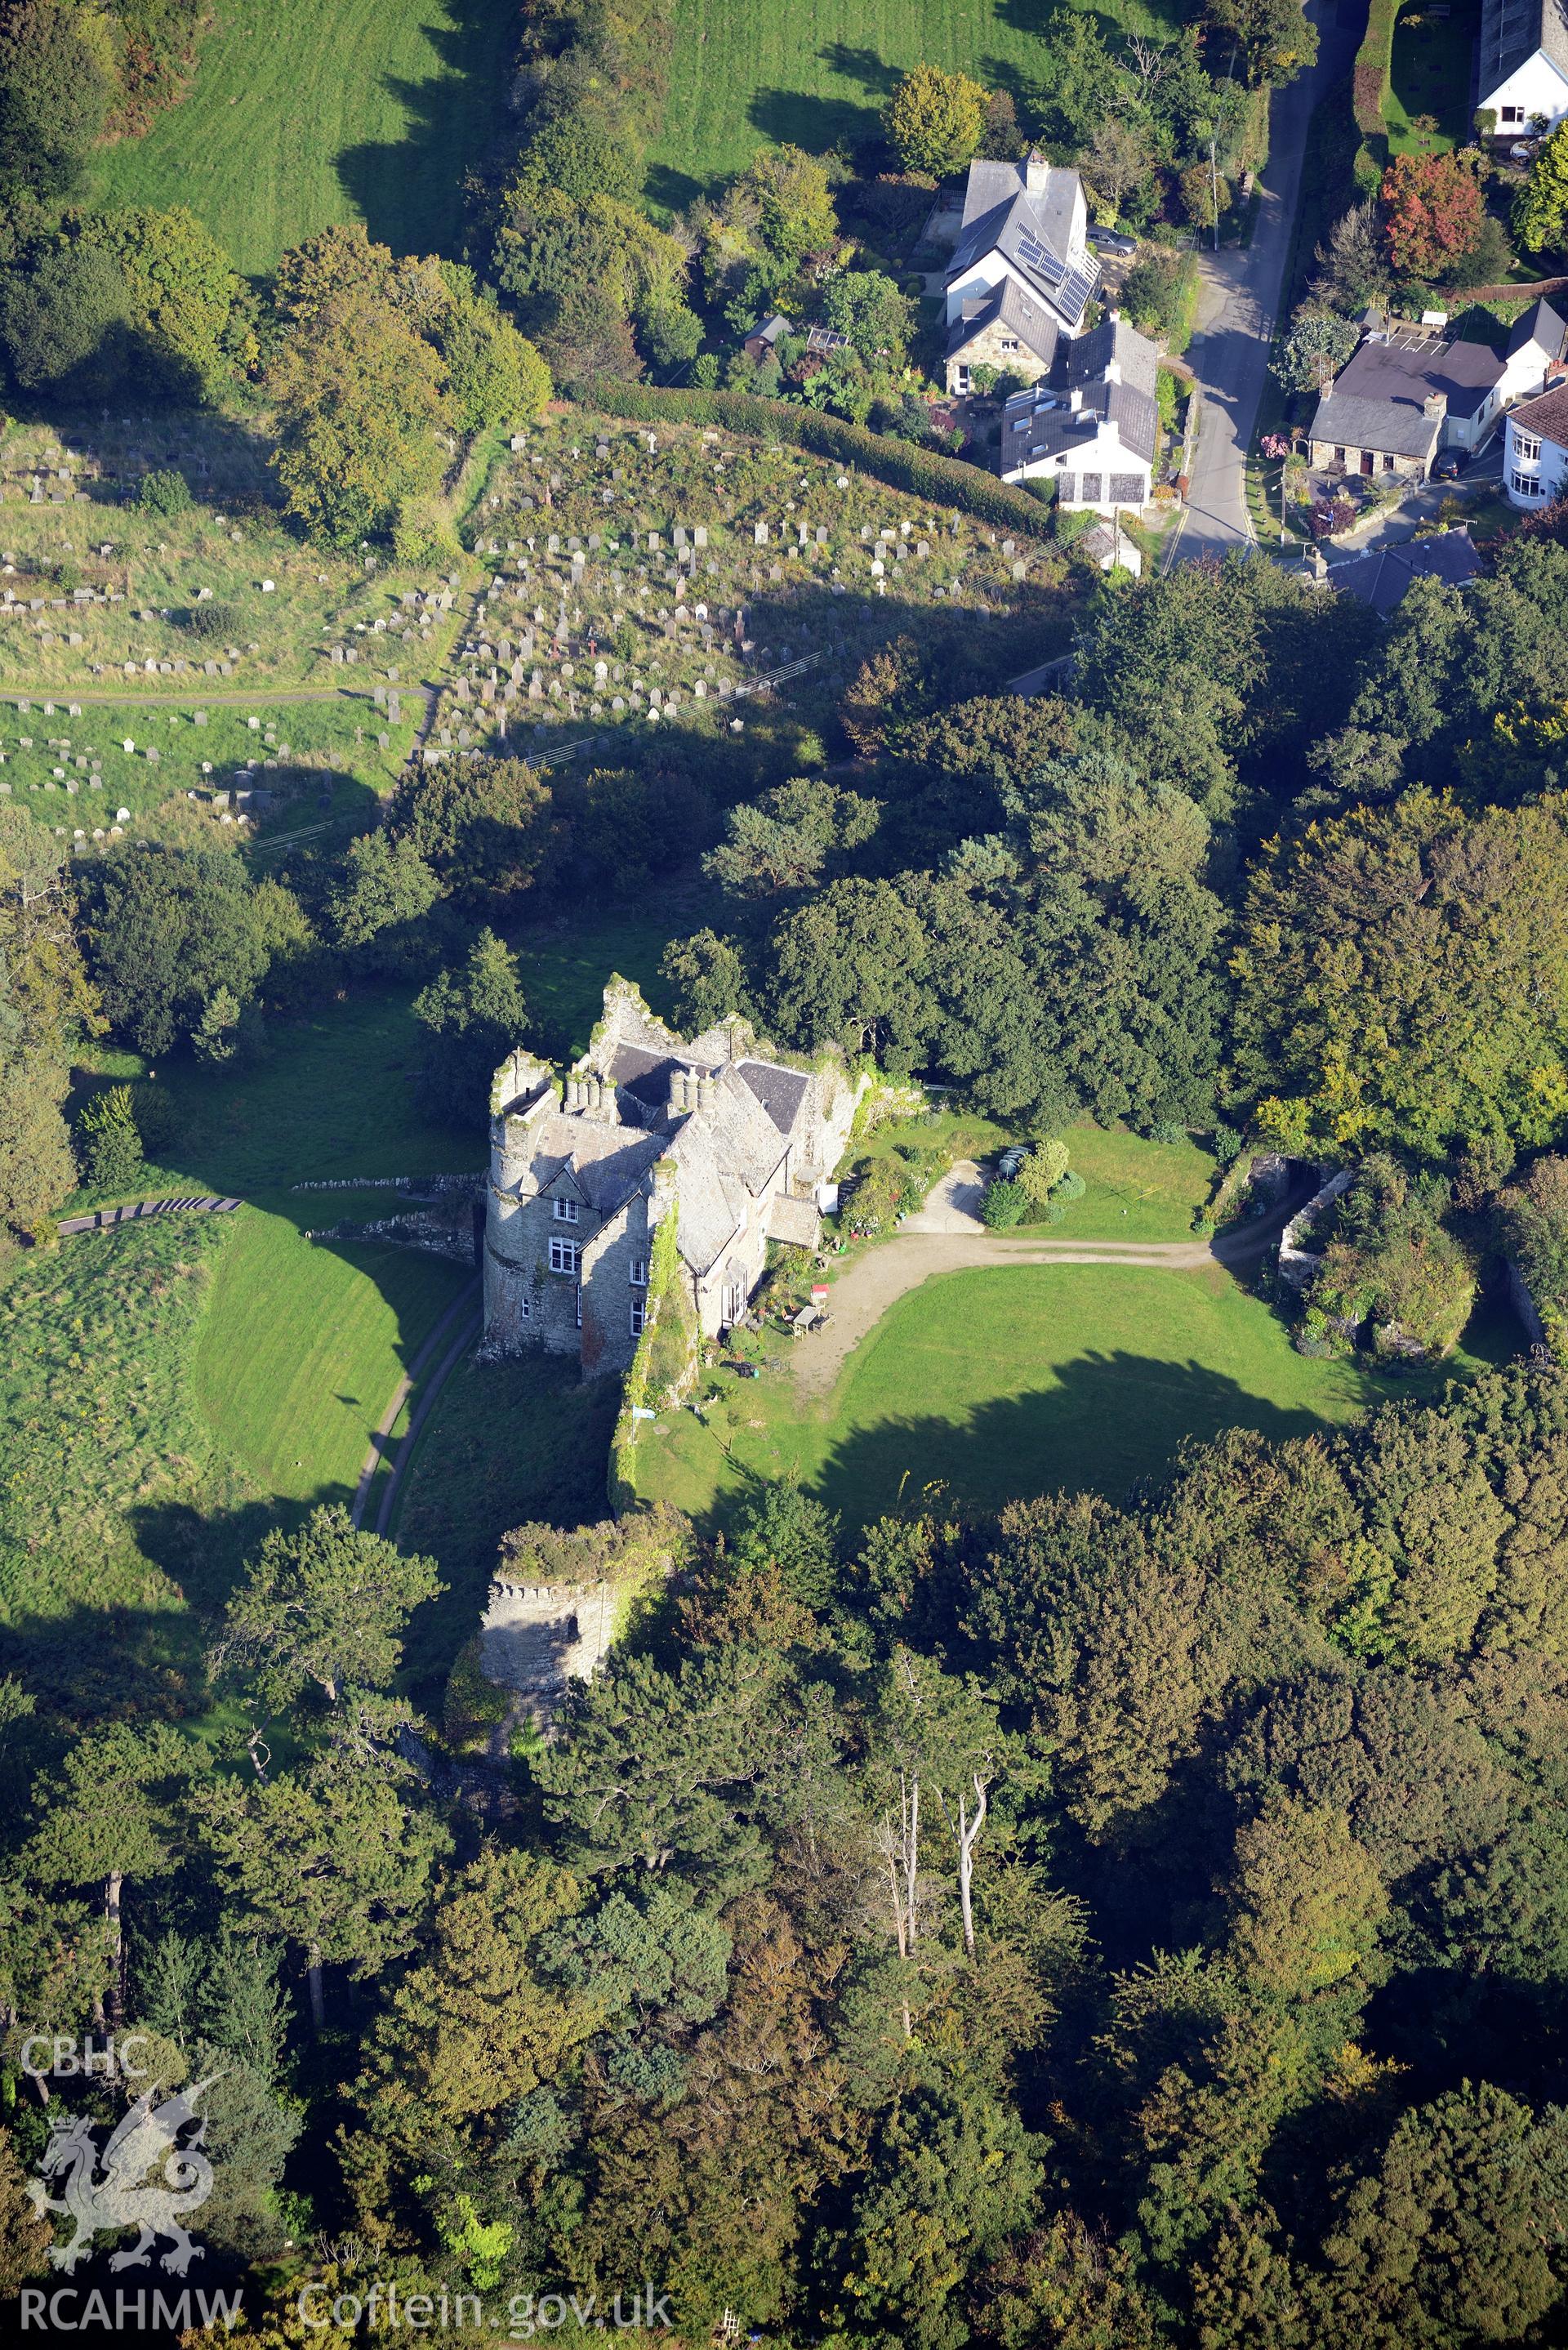 Newport Castle, Pembrokeshire. Oblique aerial photograph taken during the Royal Commission's programme of archaeological aerial reconnaissance by Toby Driver on 30th September 2015.